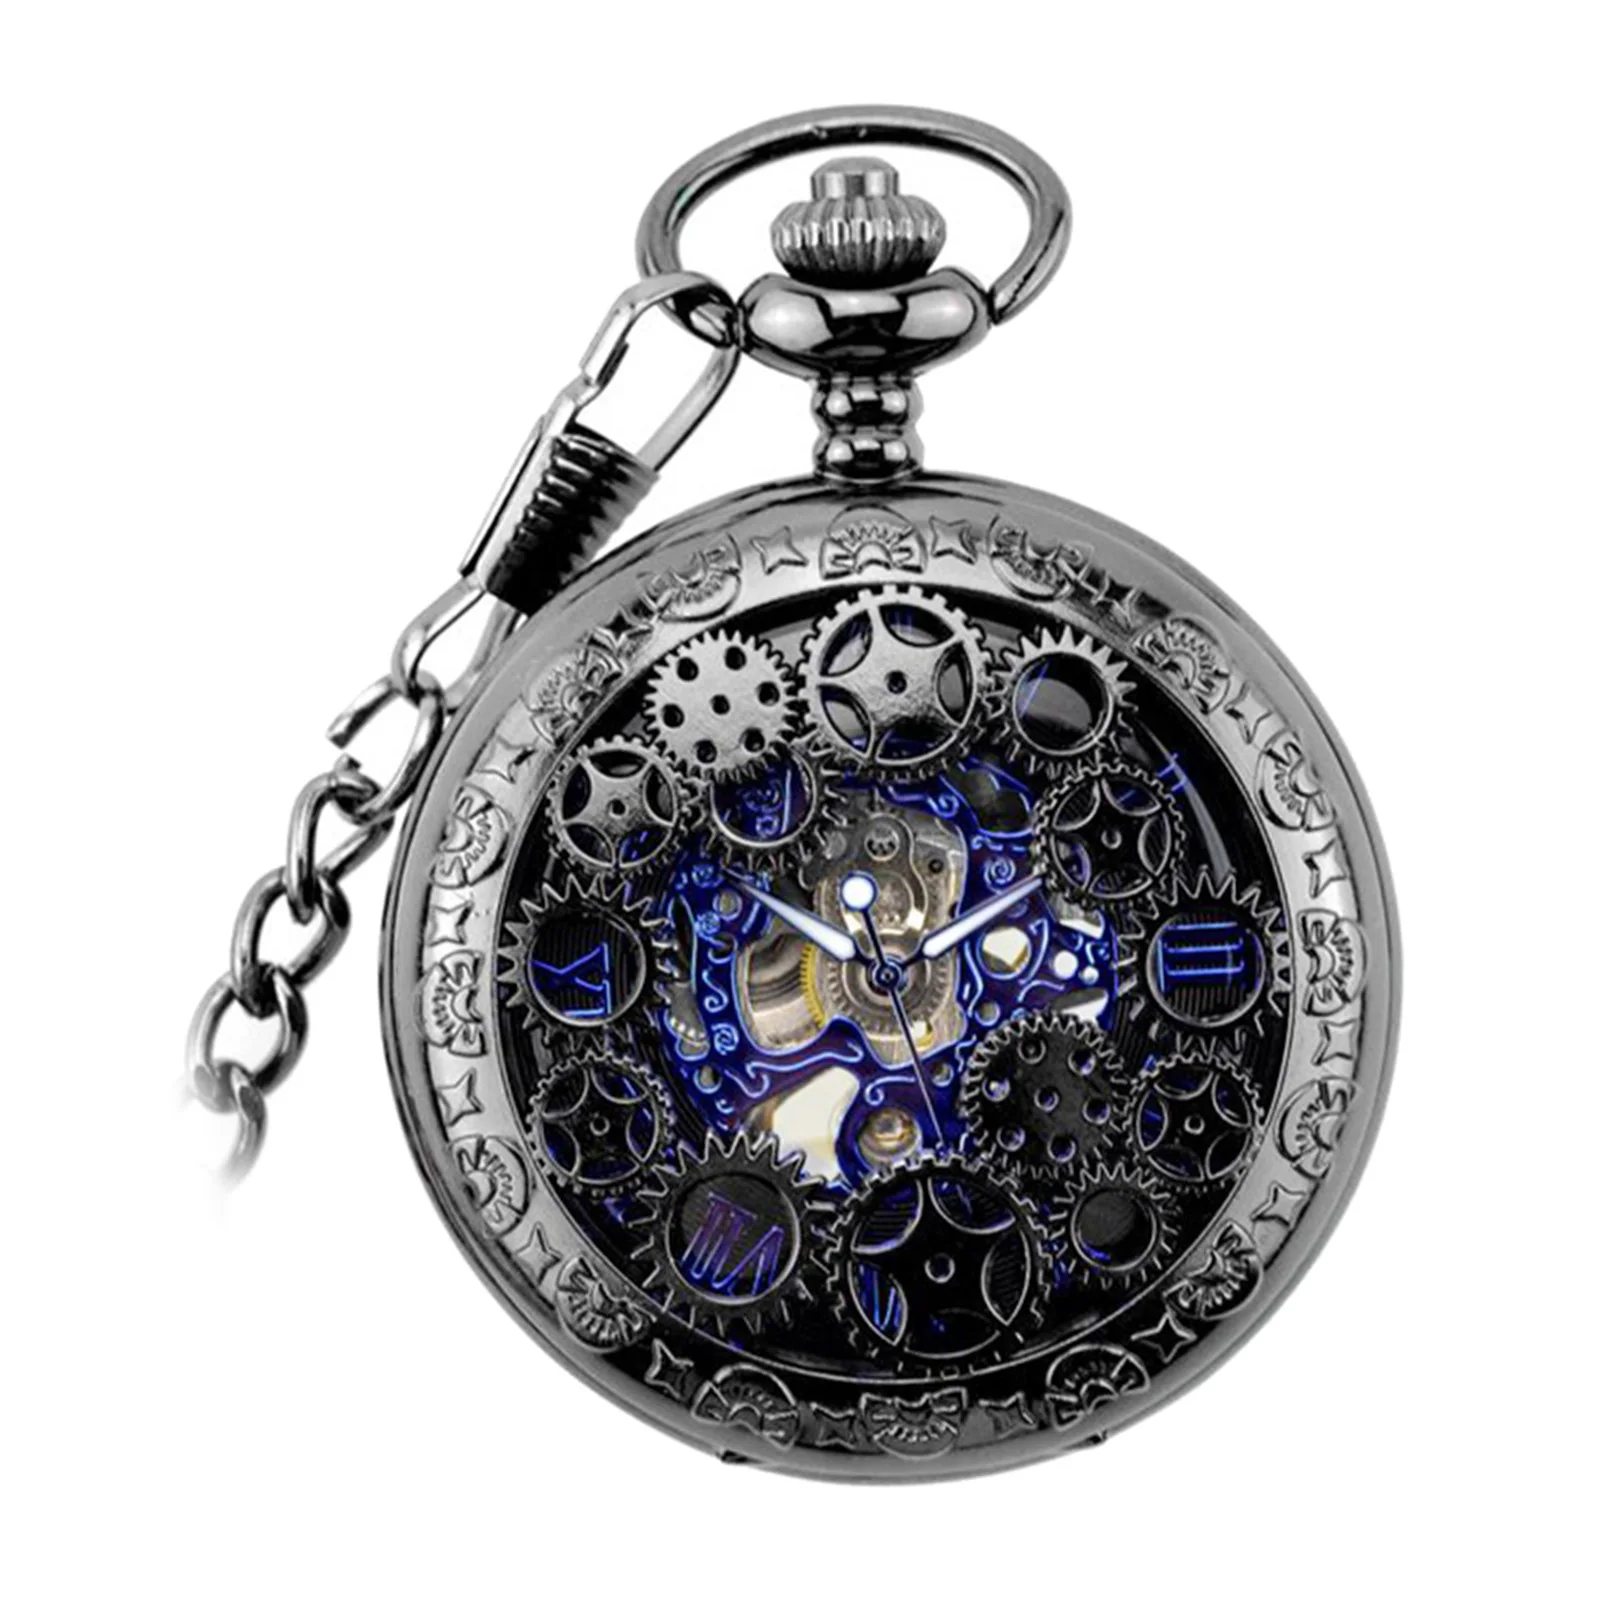 Steampunk Hands Scale Mechanical Skeleton Pocket Watch Holiday Birthday Gift for Men